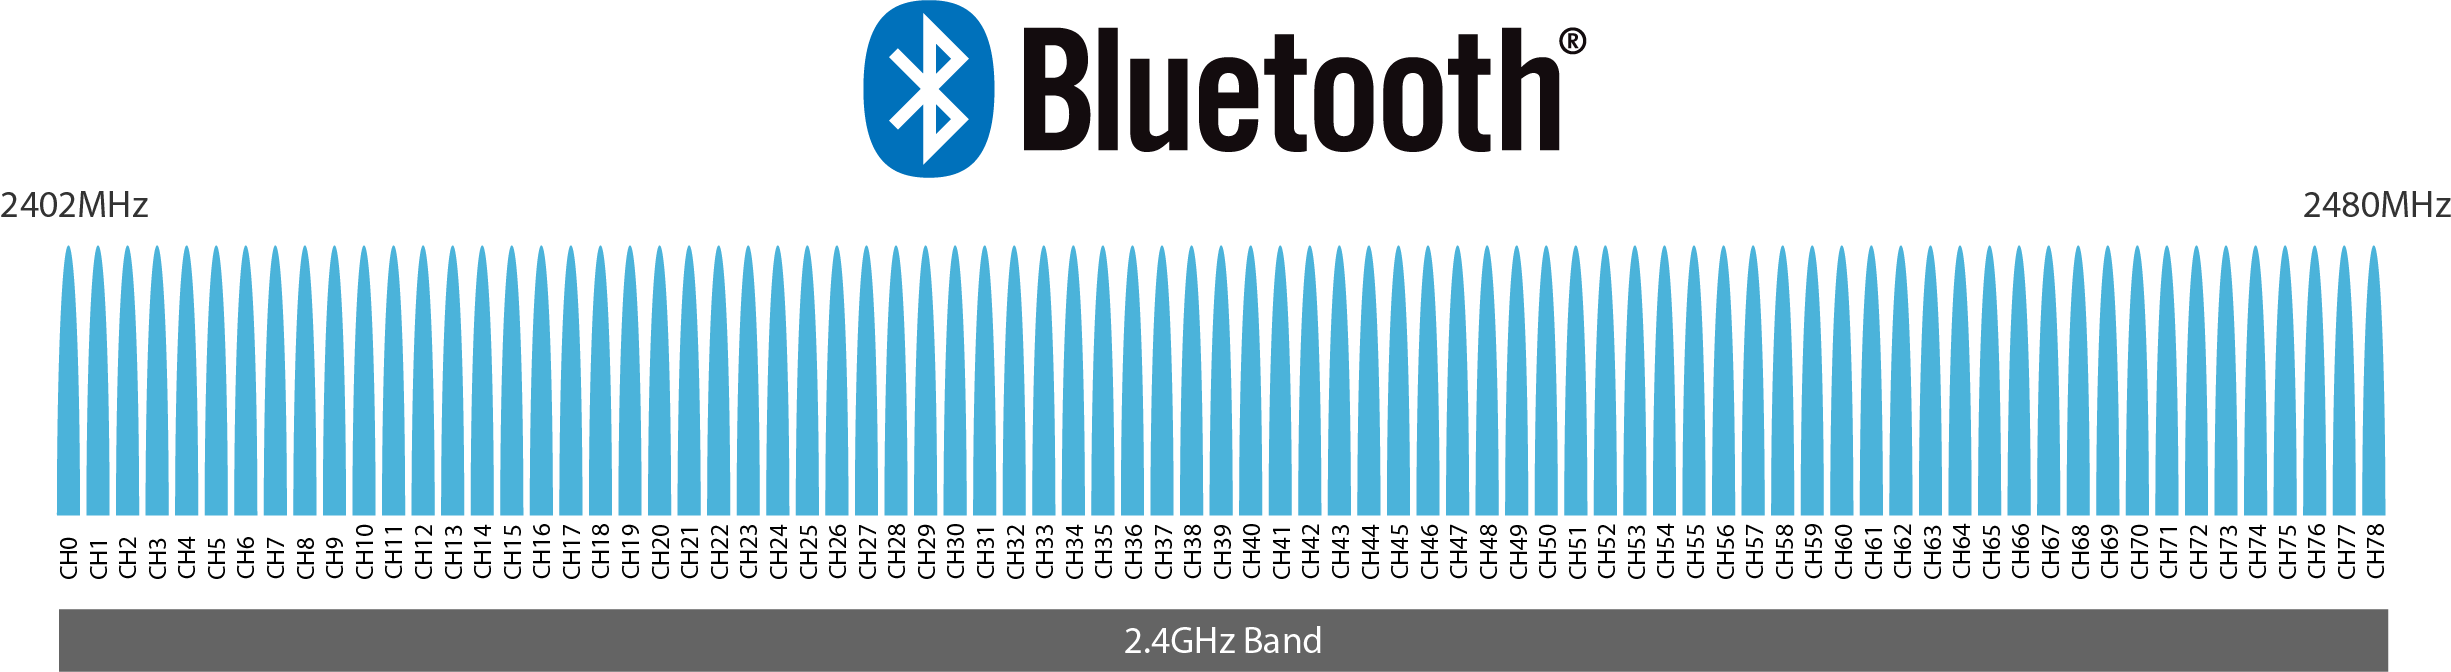 Bluetooth Classic Spectrum and Channels